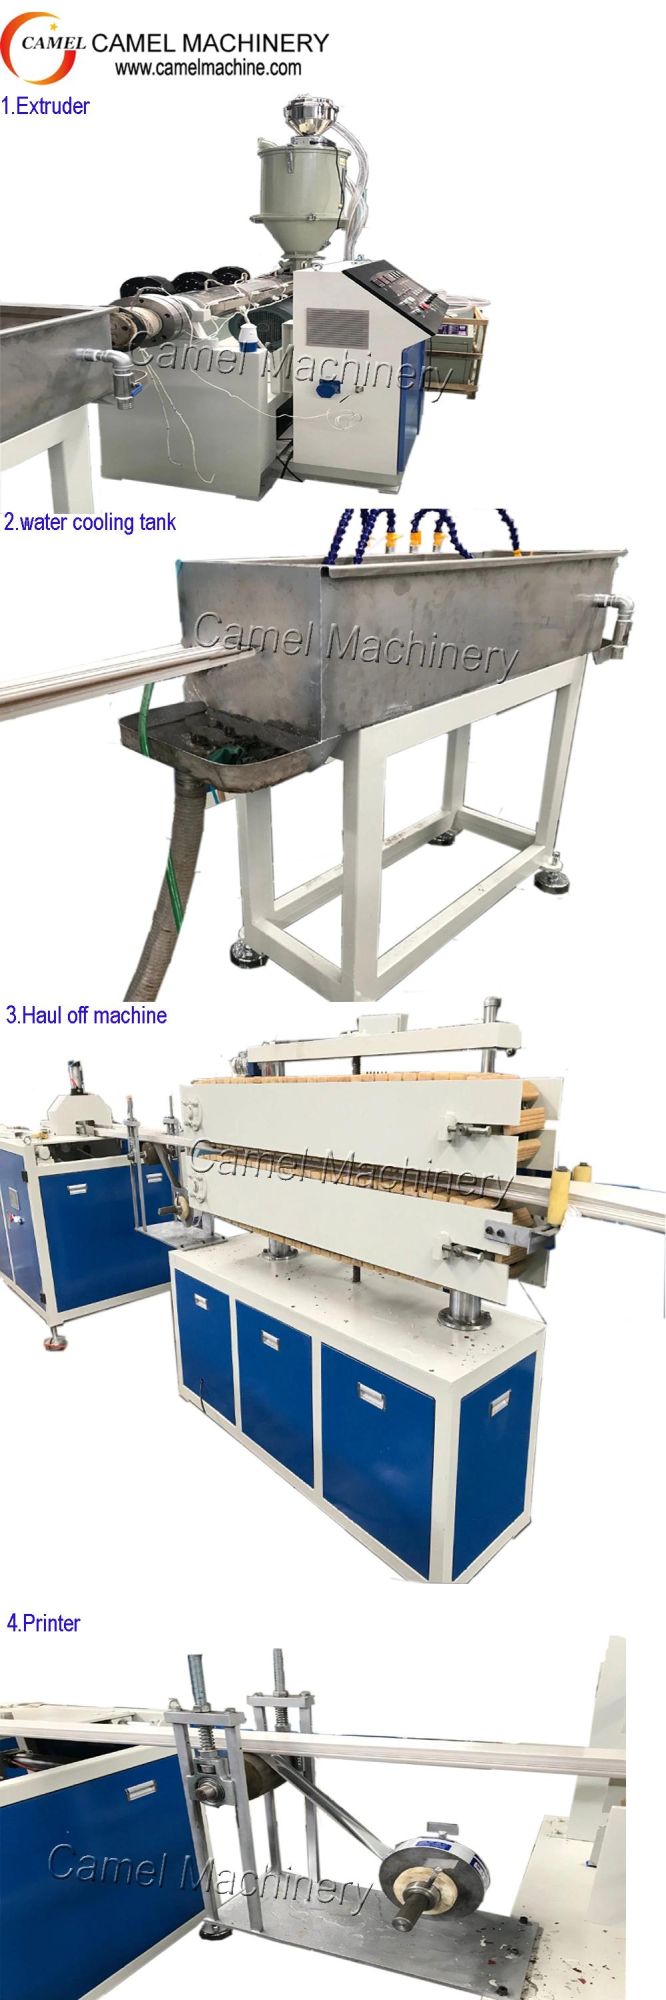 PVC Telephone Wiring Duct Production Line Making Machine